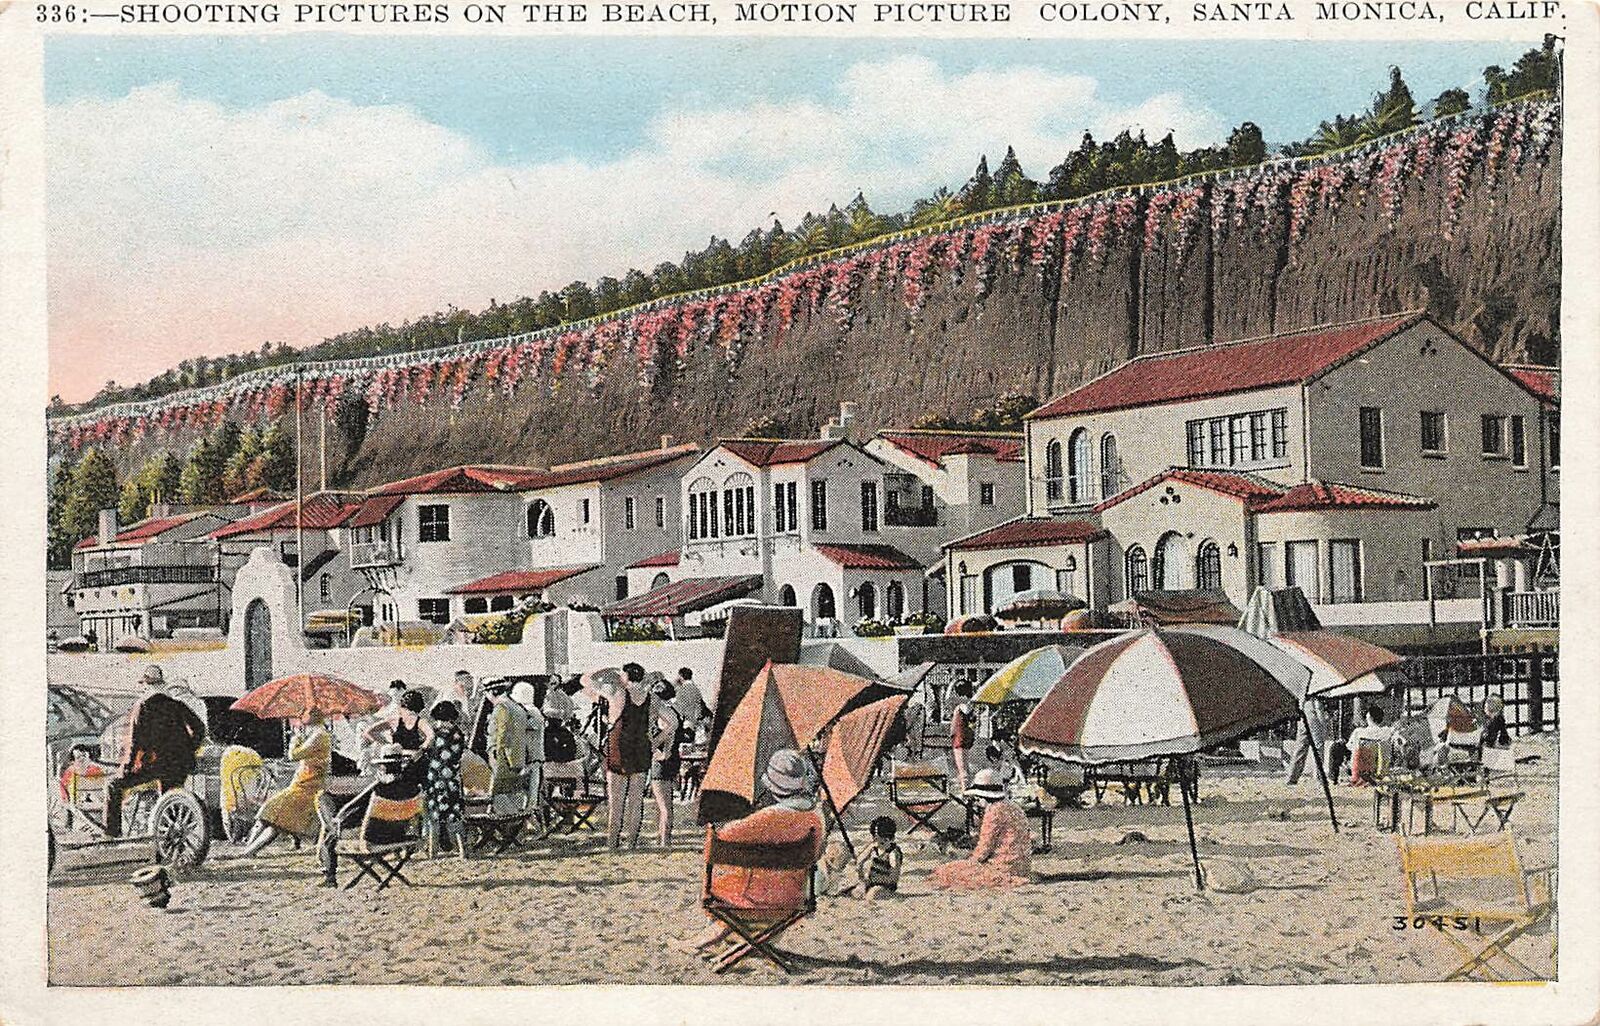 California, CA, Santa Monica, Shooting Pictures, Motion Picture Colony Postcard